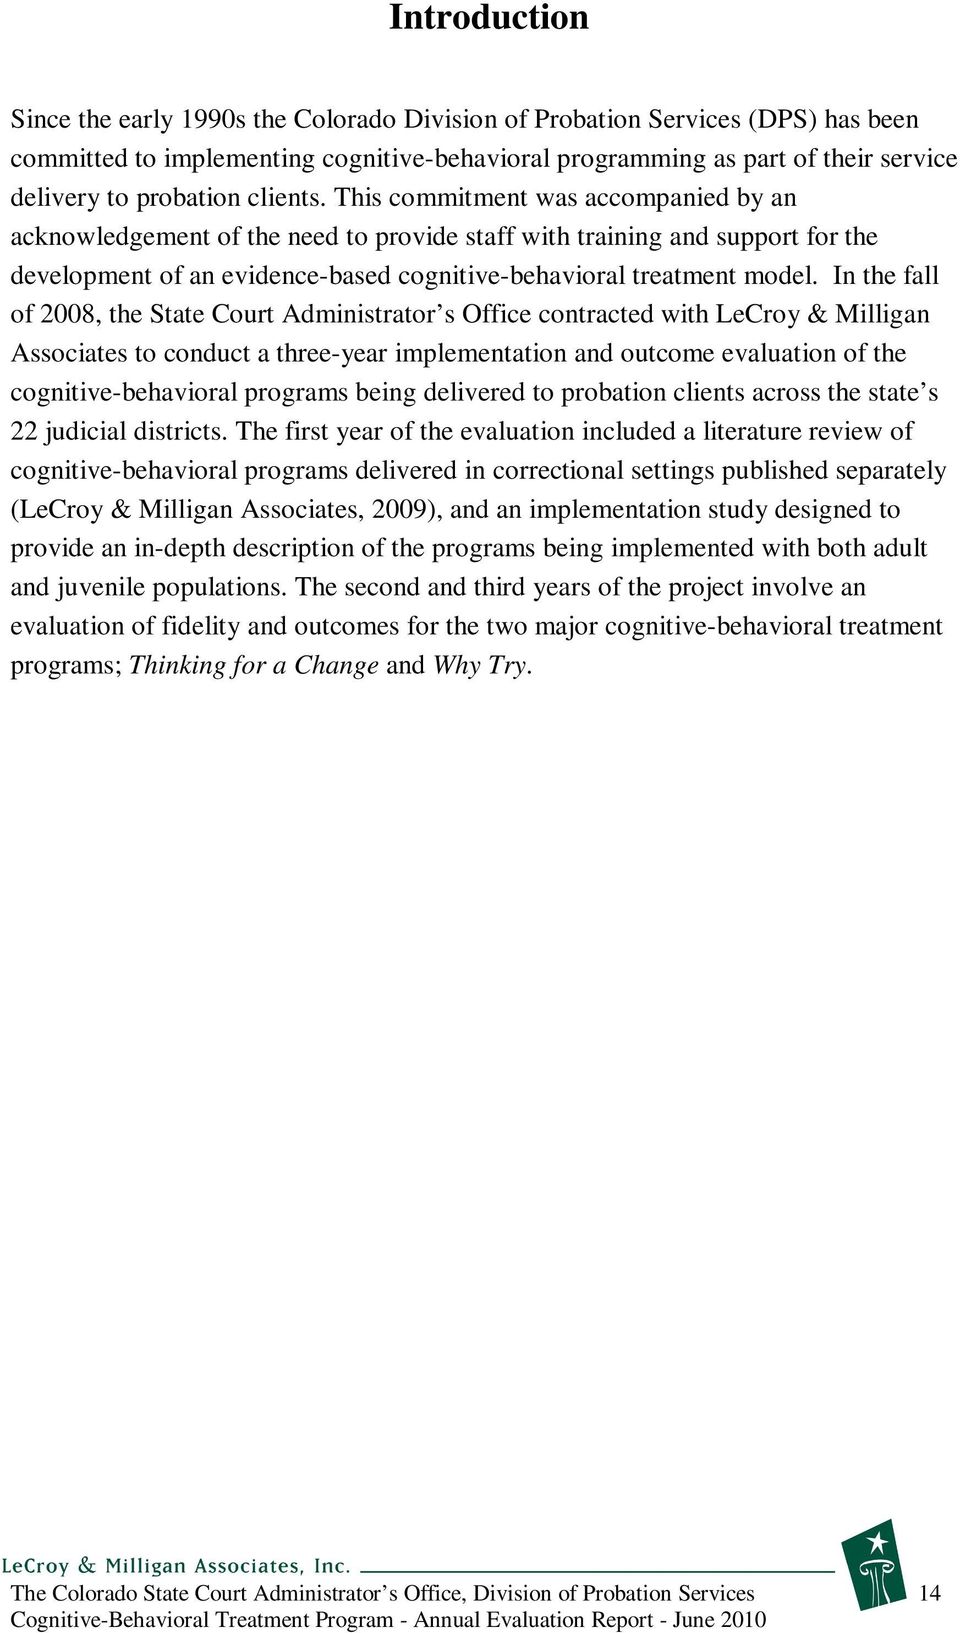 In the fall of 2008, the State Court Administrator s Office contracted with LeCroy & Milligan Associates to conduct a three-year implementation and outcome evaluation of the cognitive-behavioral